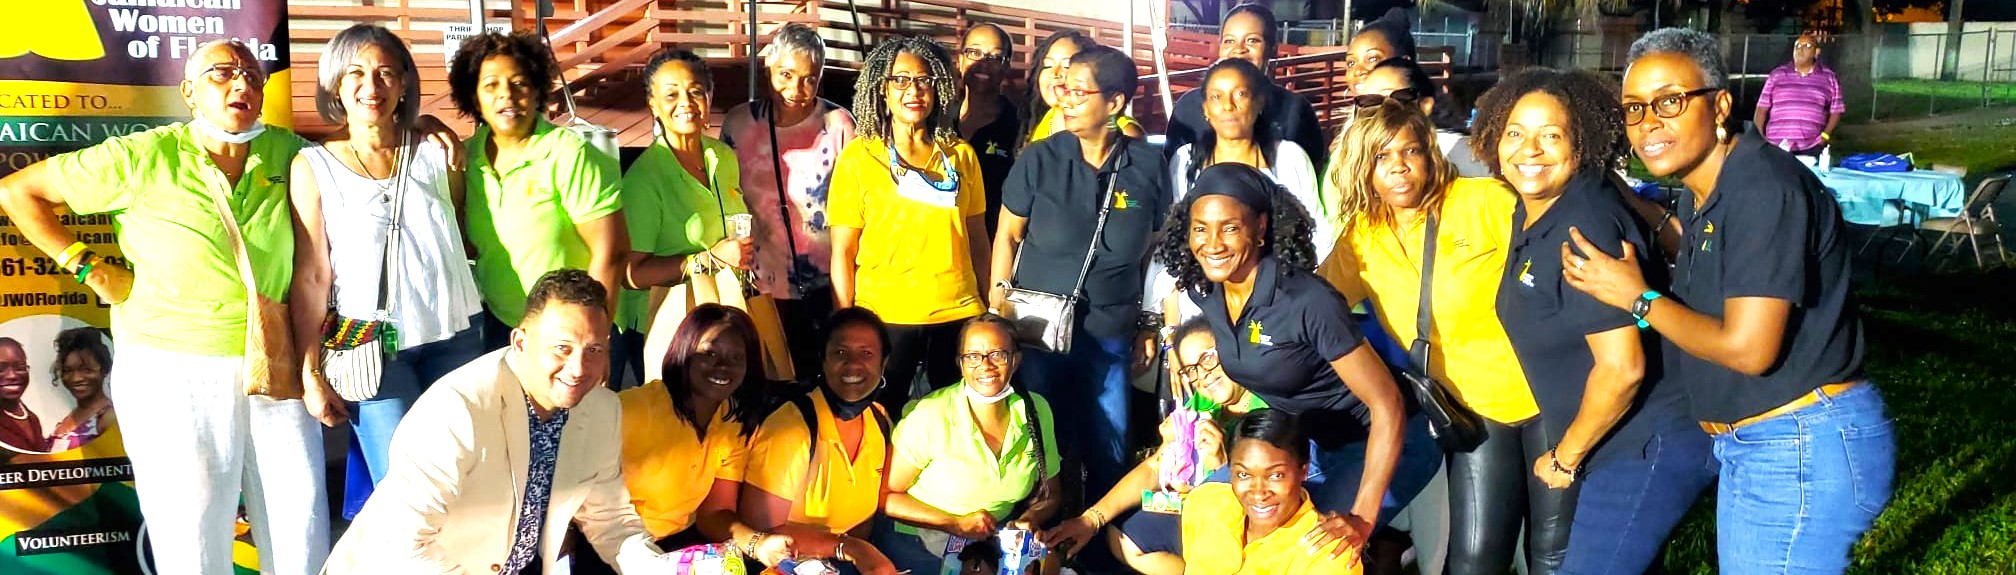 The Jamaican Women of Florida hosts Run-A-Boat  Outdoor Festival